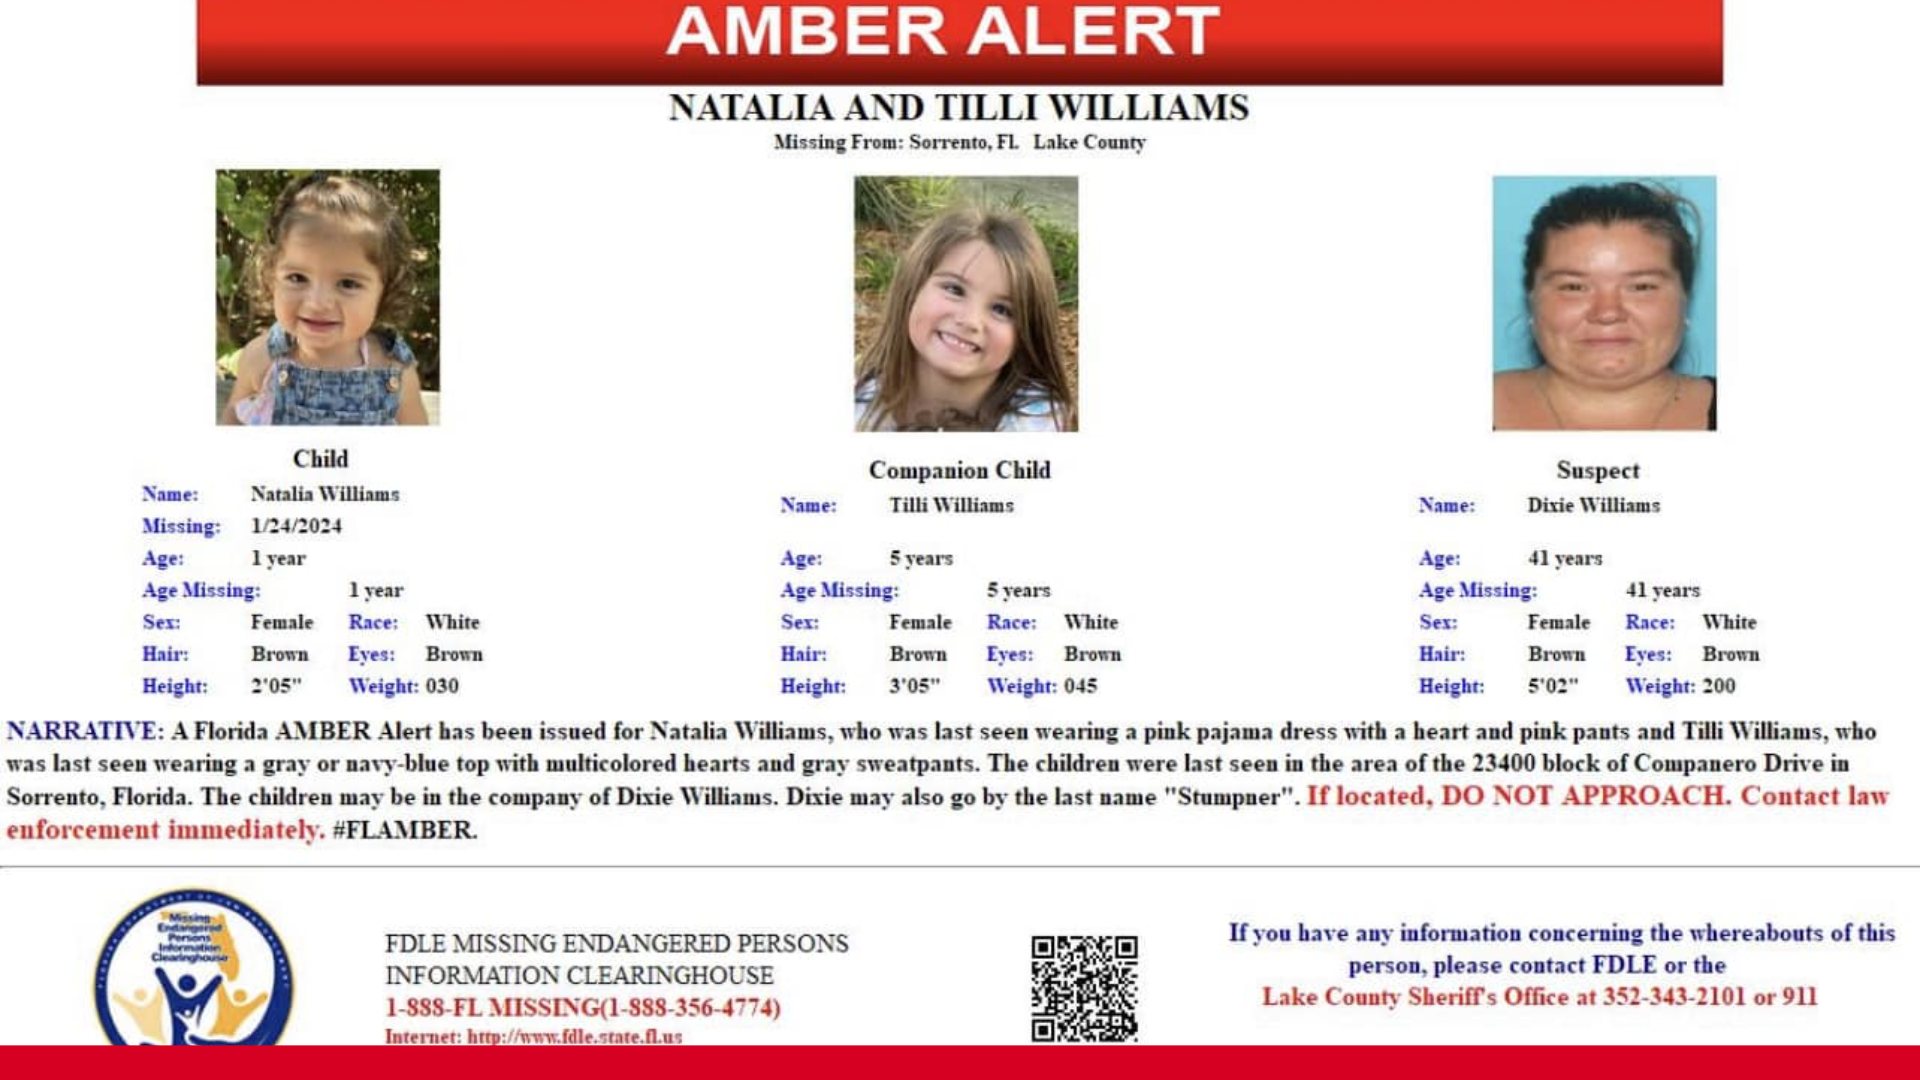 Amber Alert for two young girls in Central Florida